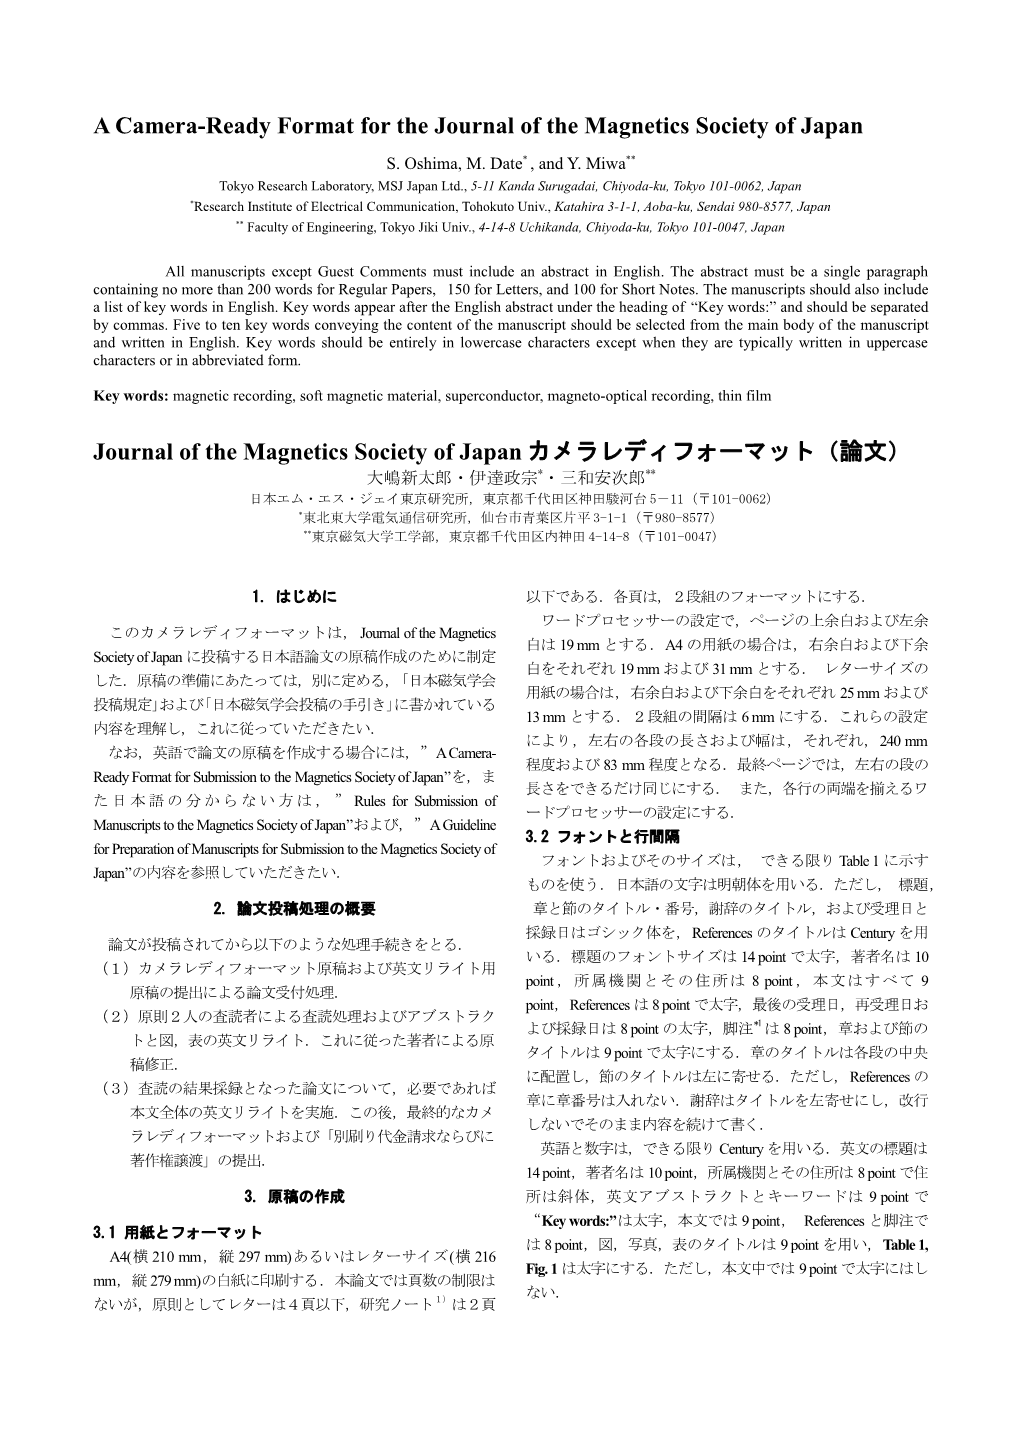 A Camera-Ready Format for the Journal of the Magnetics Society of Japan